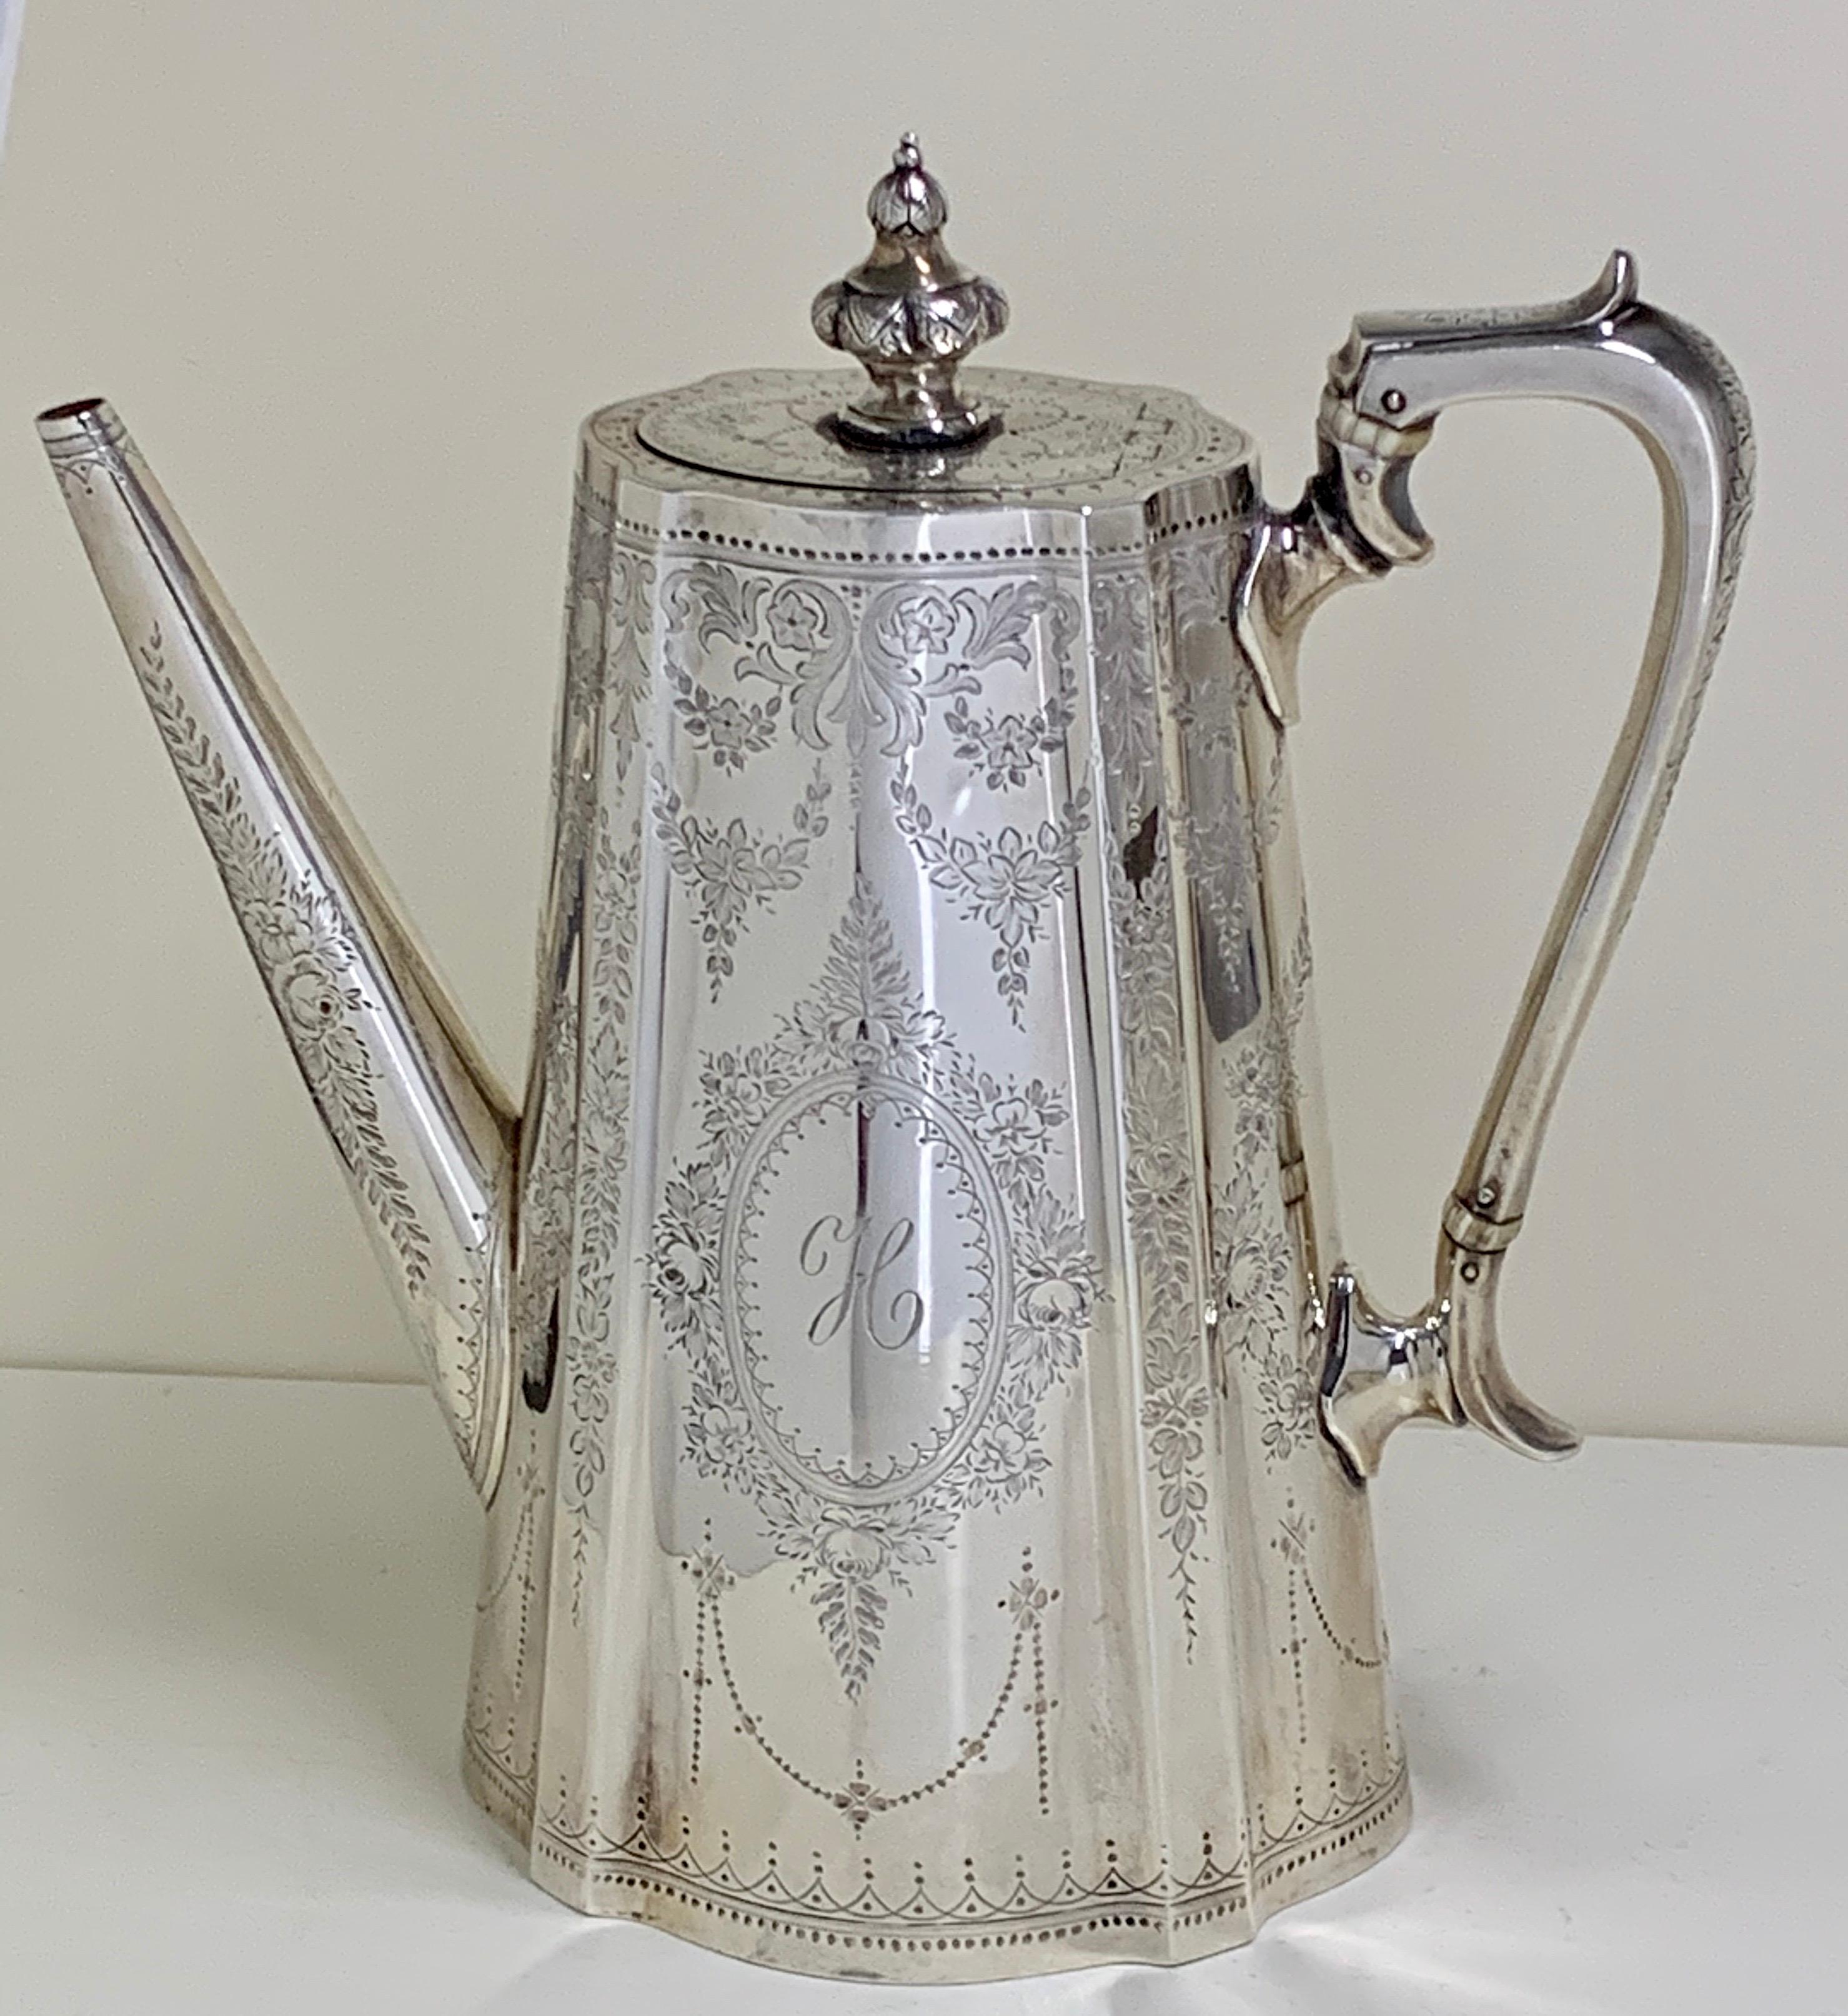 This superb high quality set was hallmarked in London in 1873 by Samuel Smily or Smiley,
This is a Victorian, sterling silver tea and coffee service featuring beautifully engraved floral and scrolled decoration on a canister shaped body with large